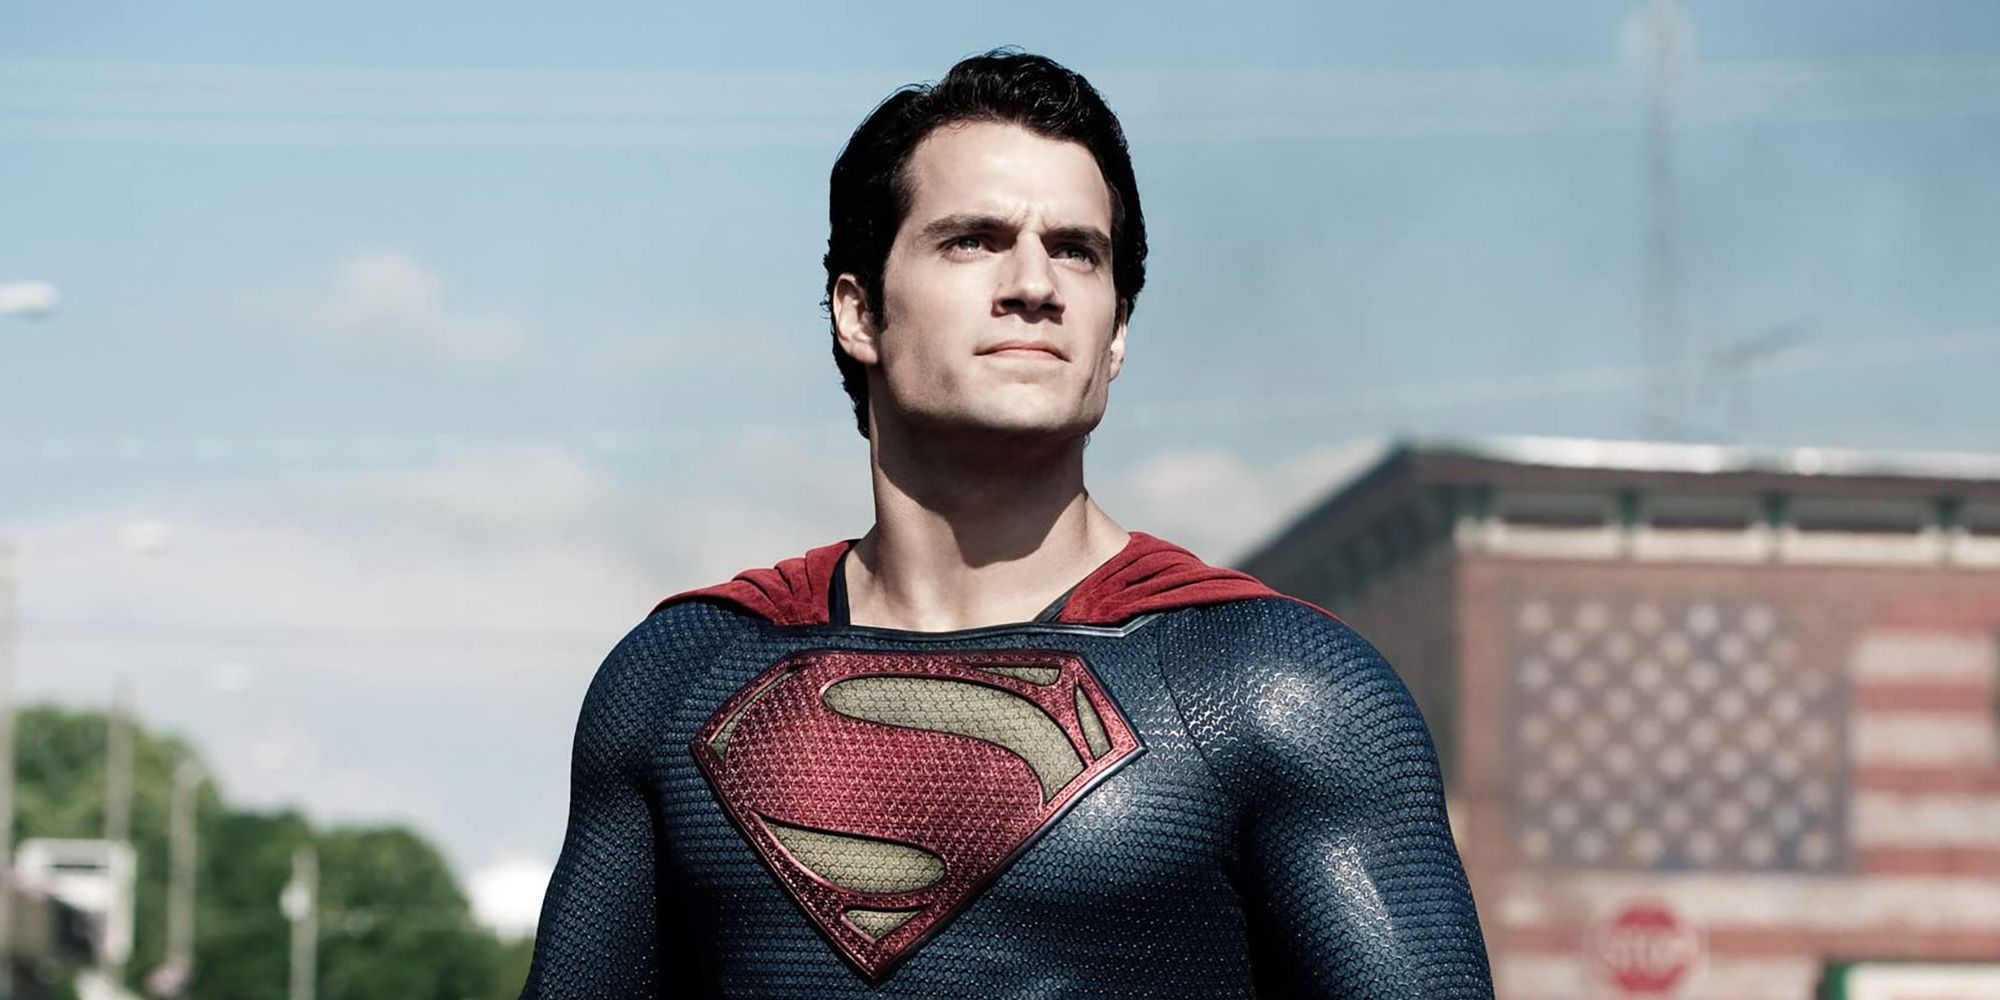 Henry Cavill standing in front of an American flag as Superman in Man of Steel.